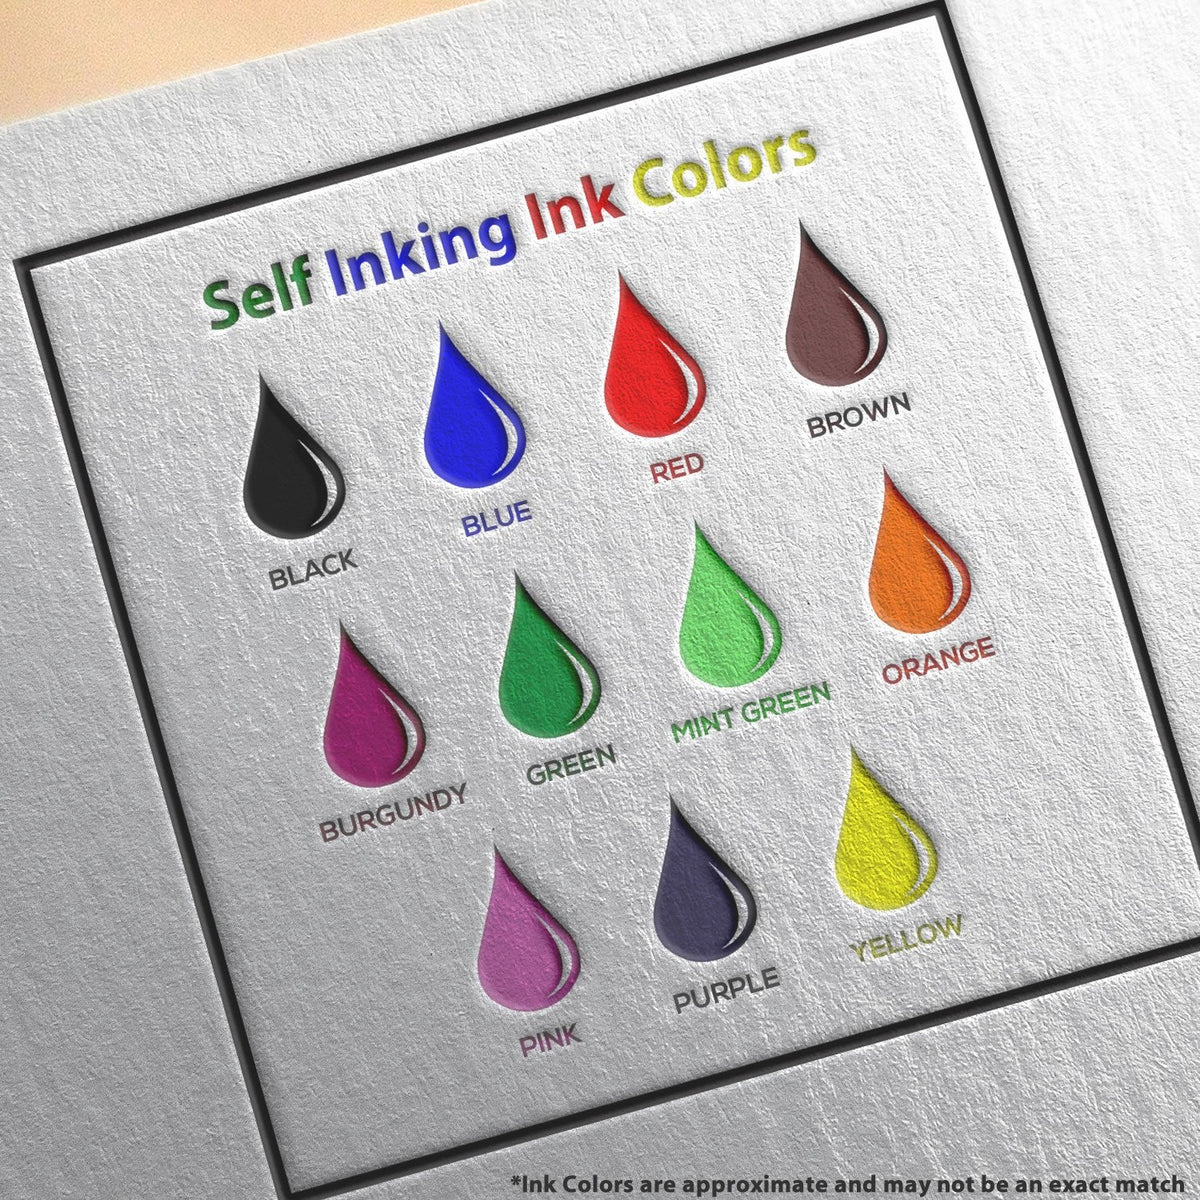 Self-Inking No Such Number Stamp Ink Color Options